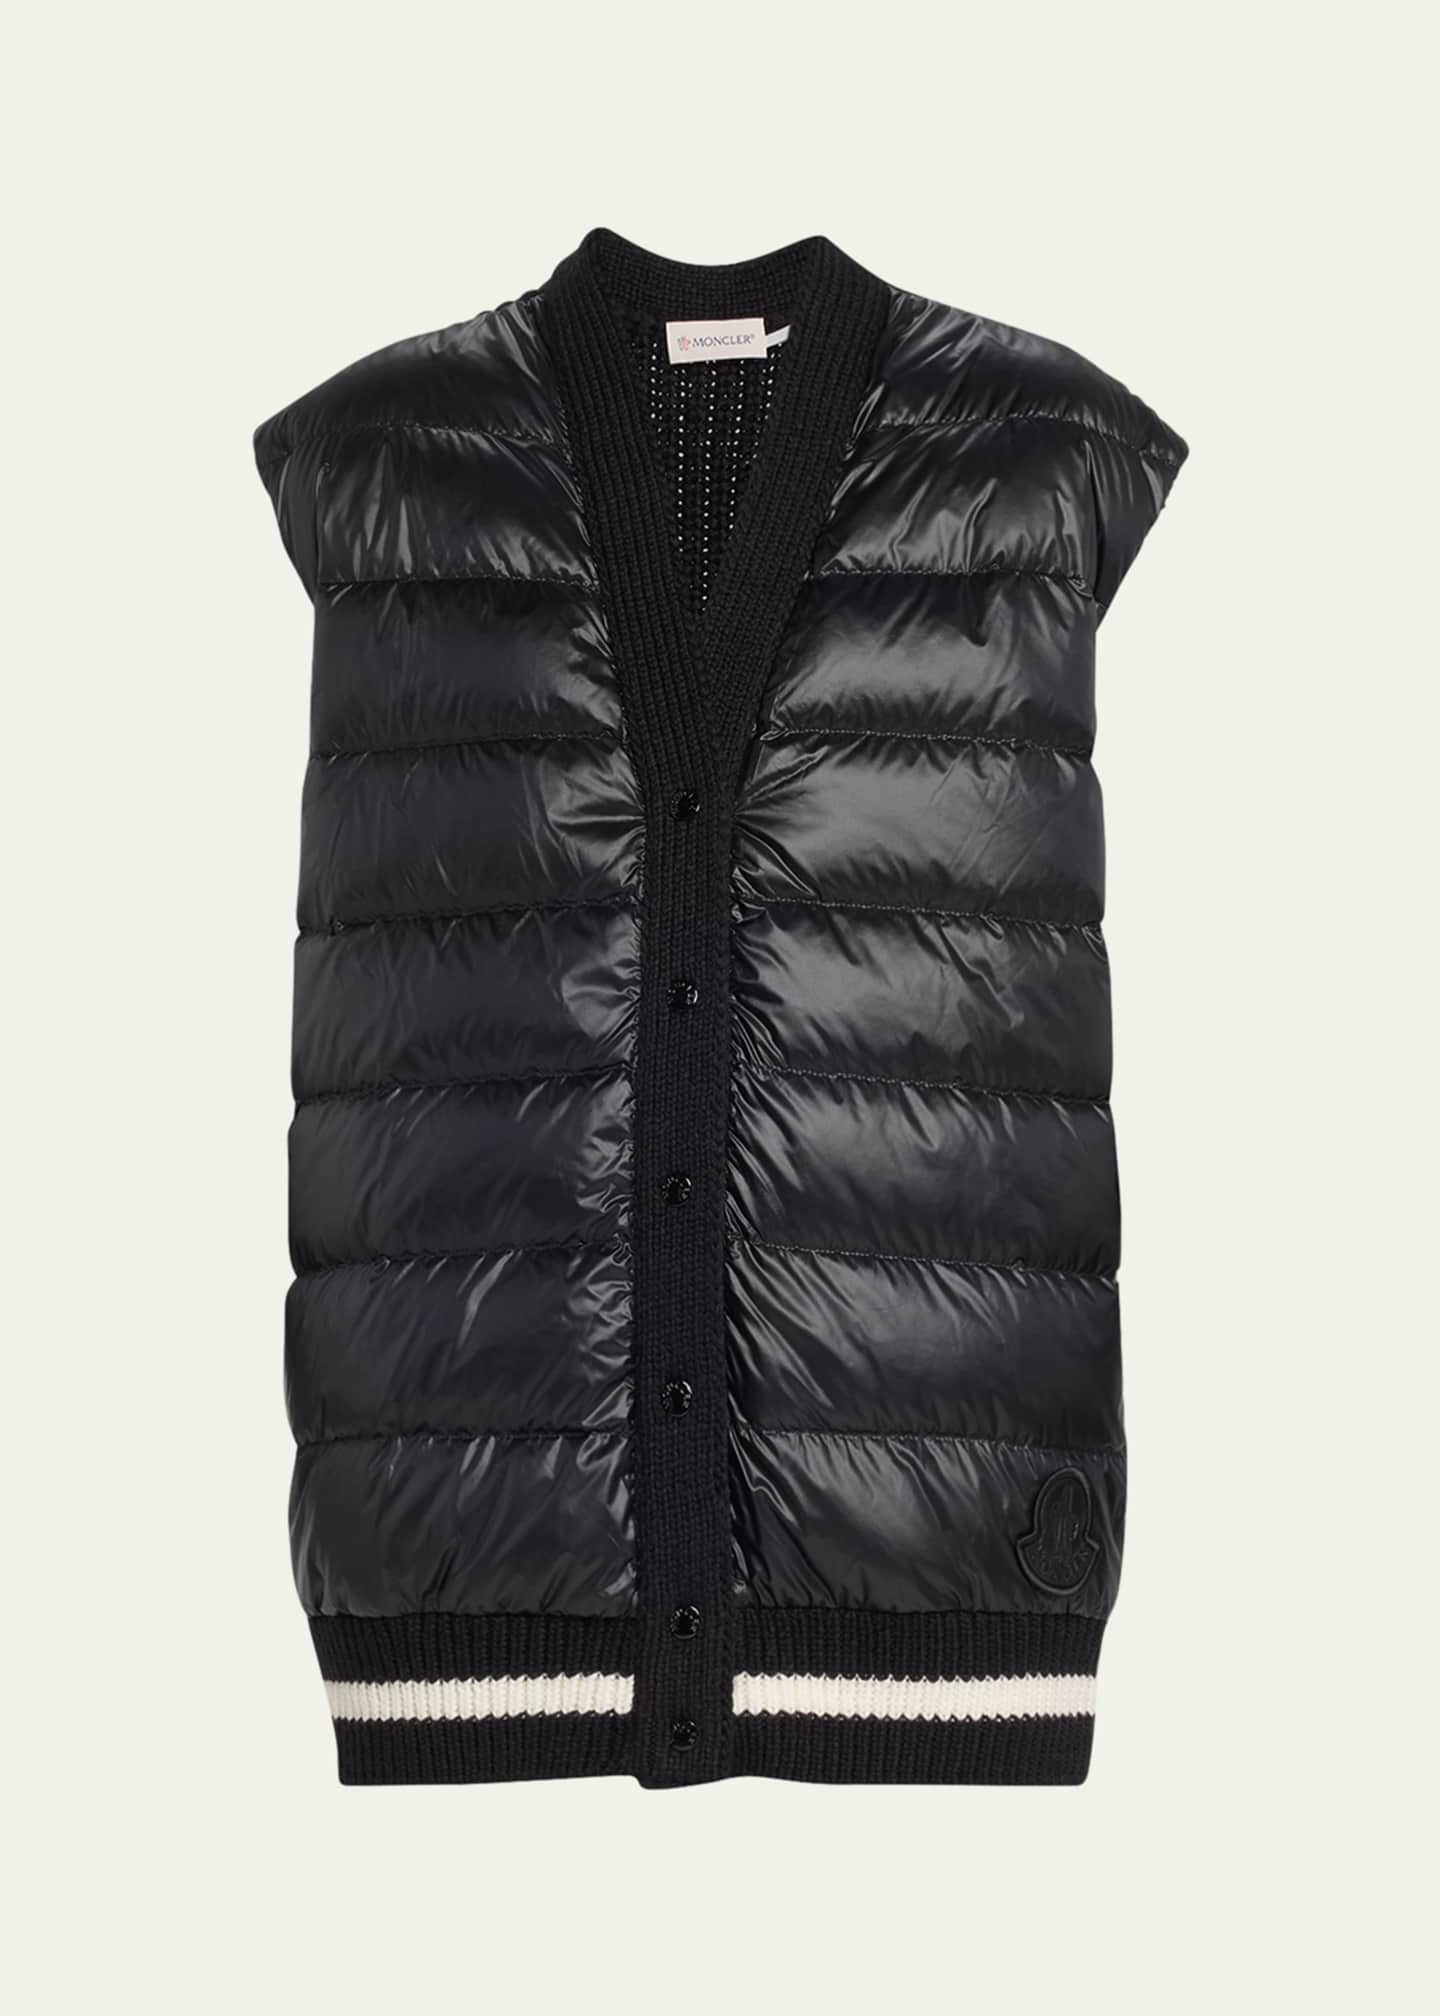 Moncler Puffer Vest with Wool Back - Bergdorf Goodman